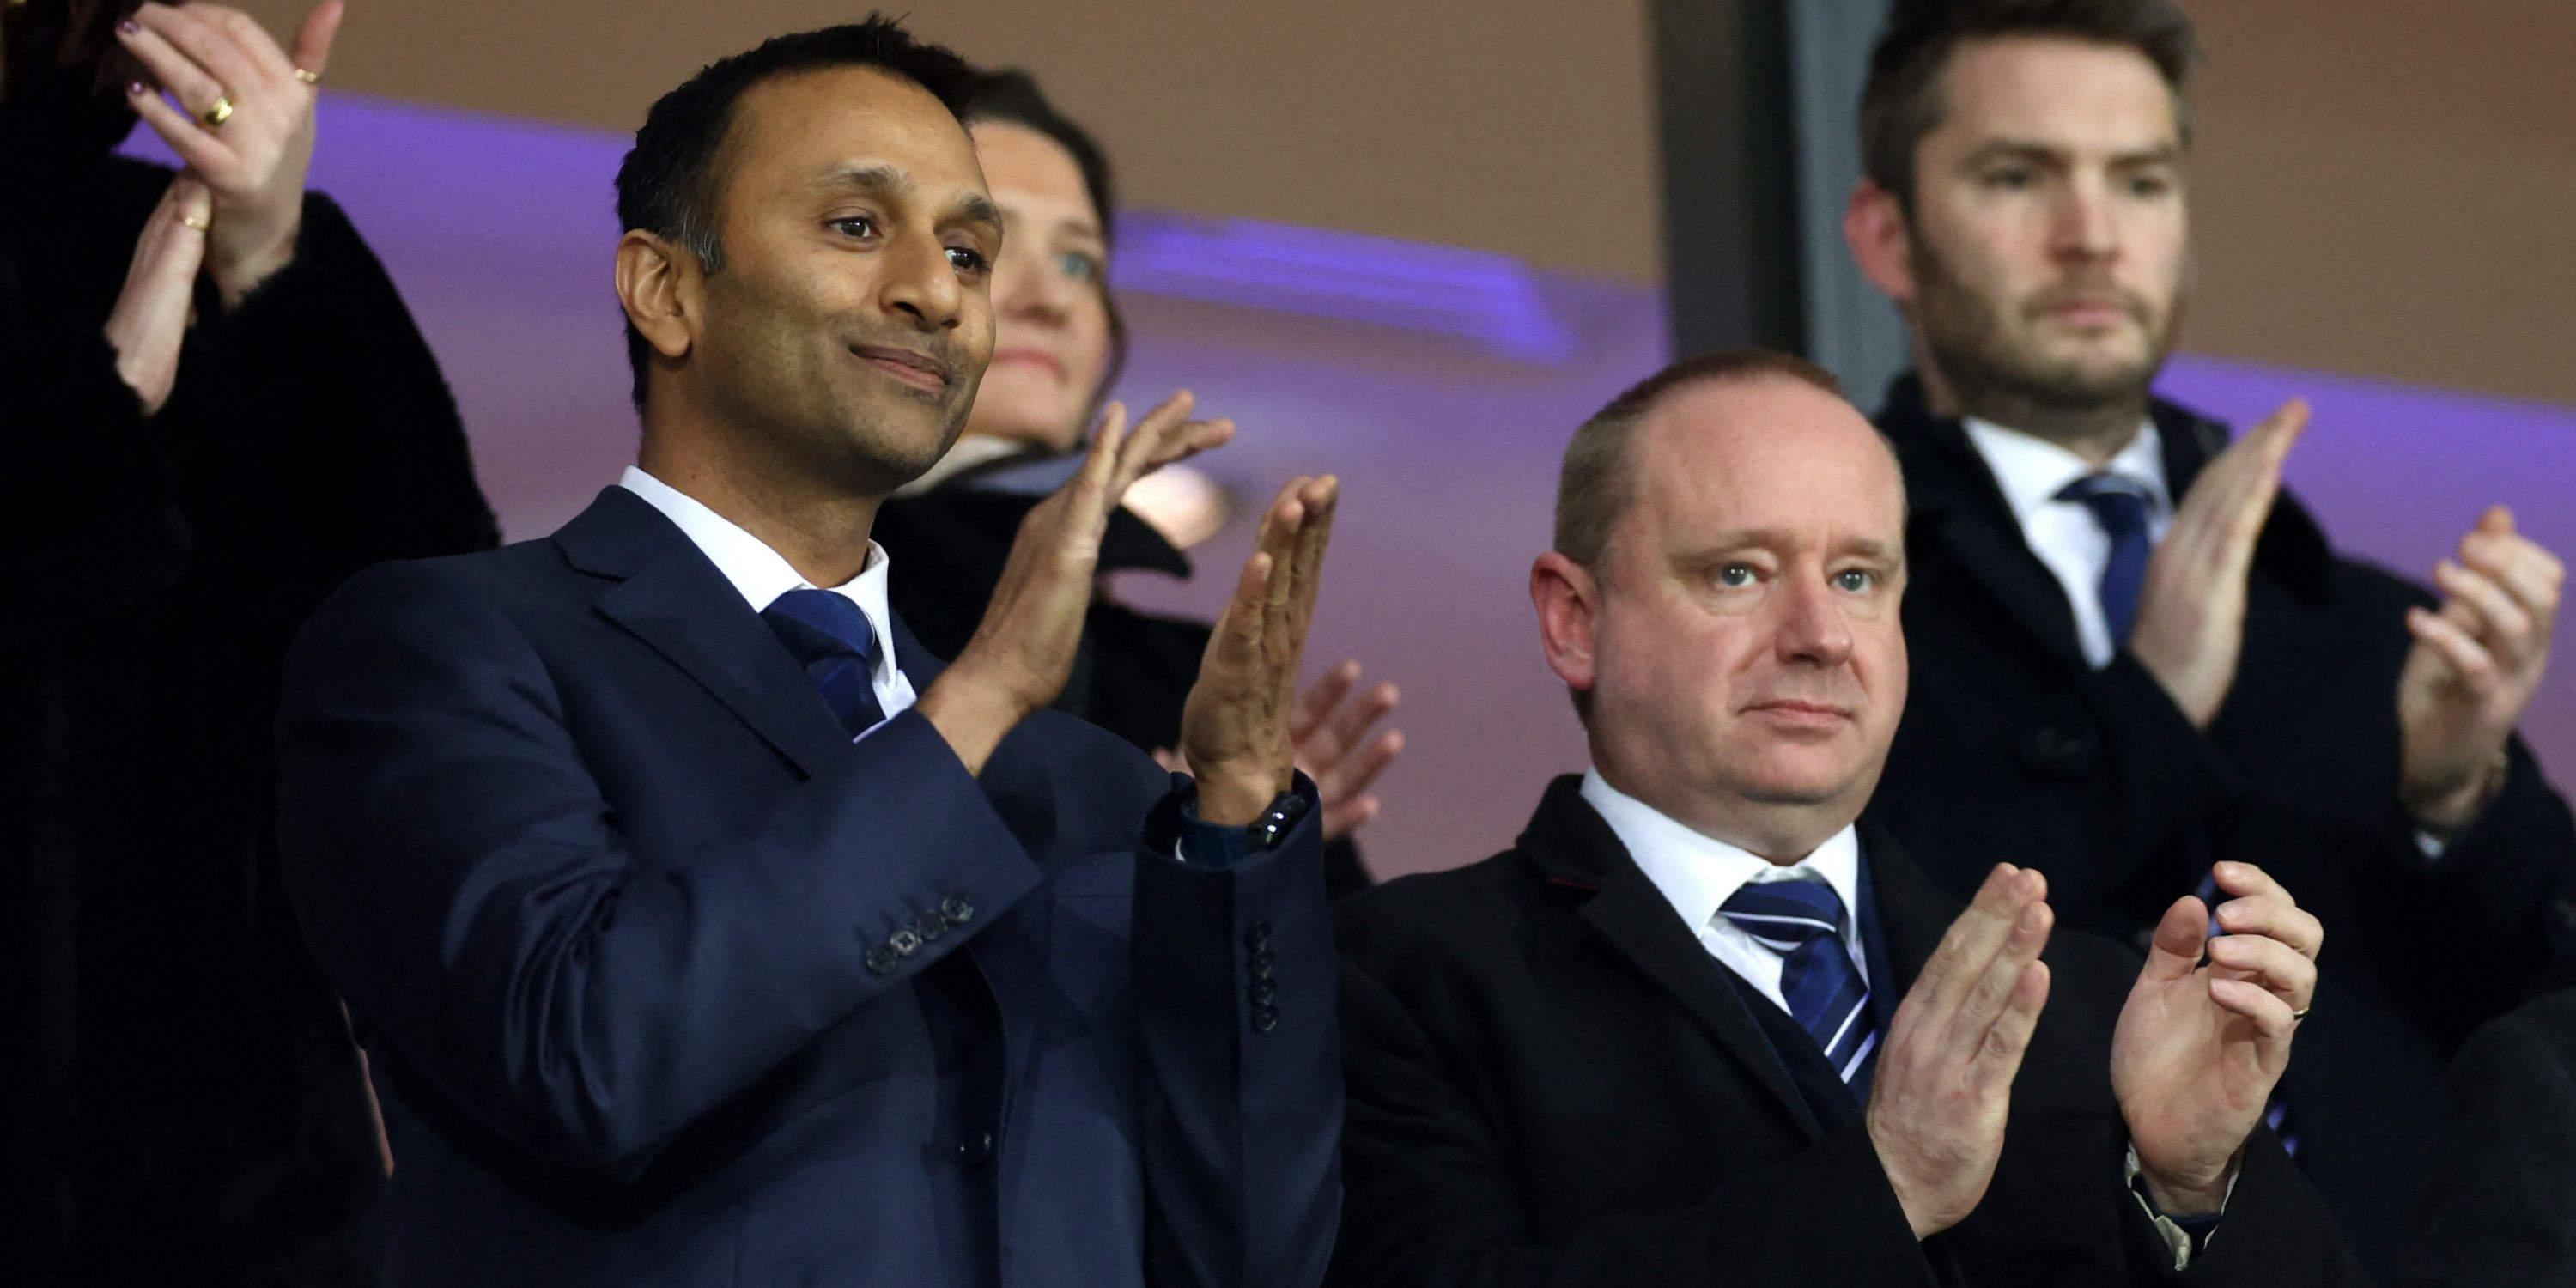 Shilen Patel: Net worth, West Brom takeover, age, wife, businesses